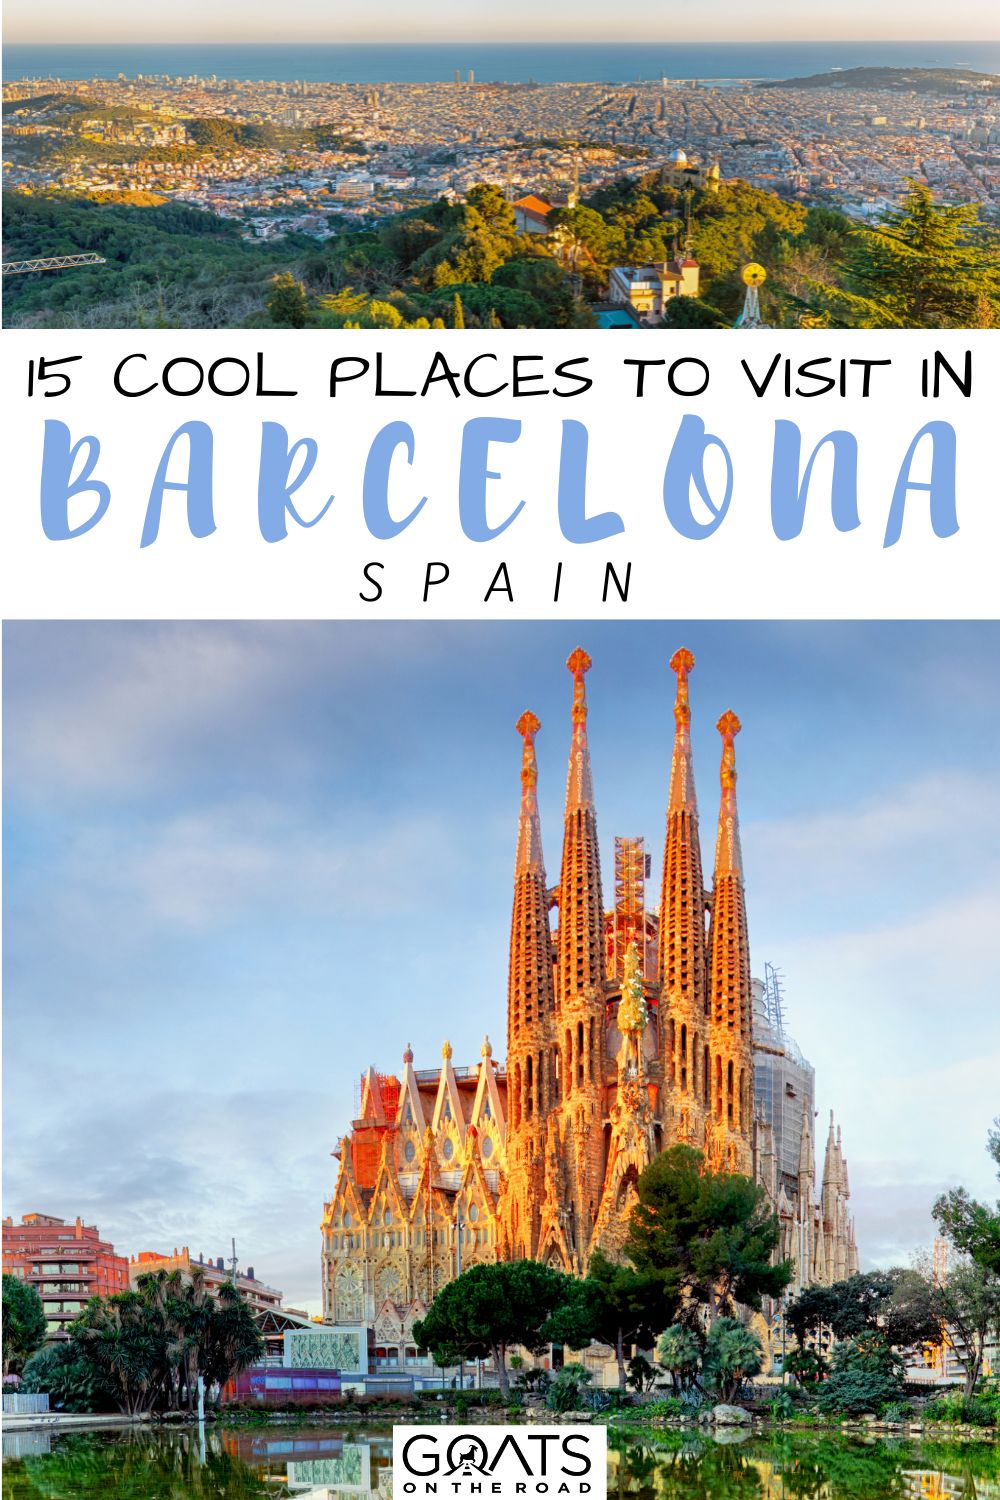 “15 Cool Places To Visit in Barcelona, Spain